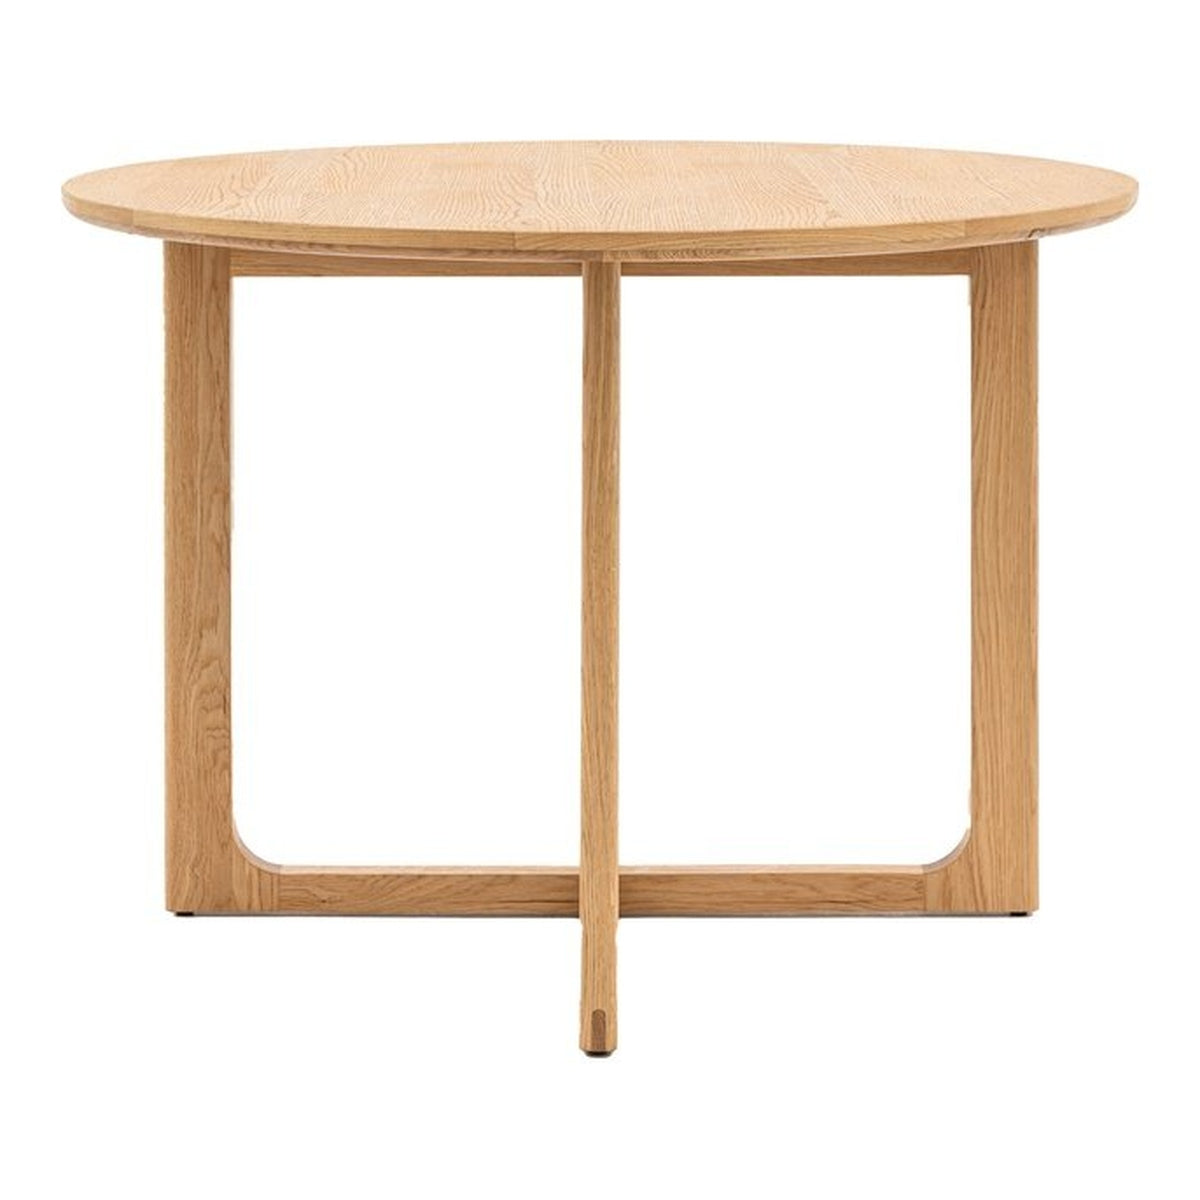 Gallery Interiors Croft Round Dining Table In Natural